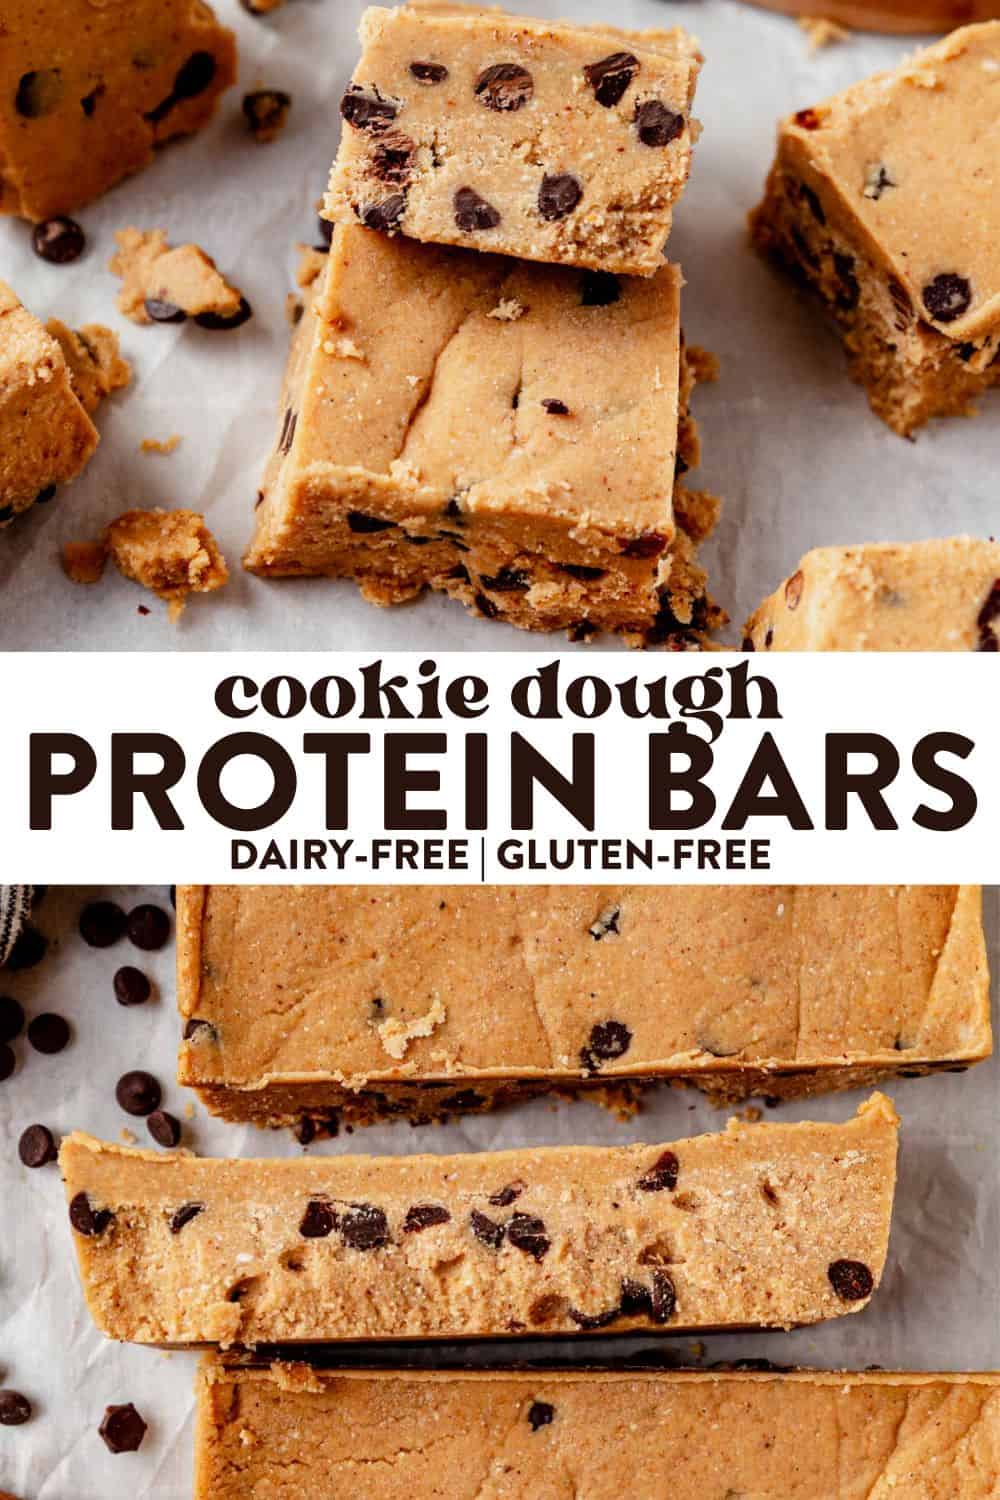 No Bake Chocolate Chip Cookie Dough Protein Bars